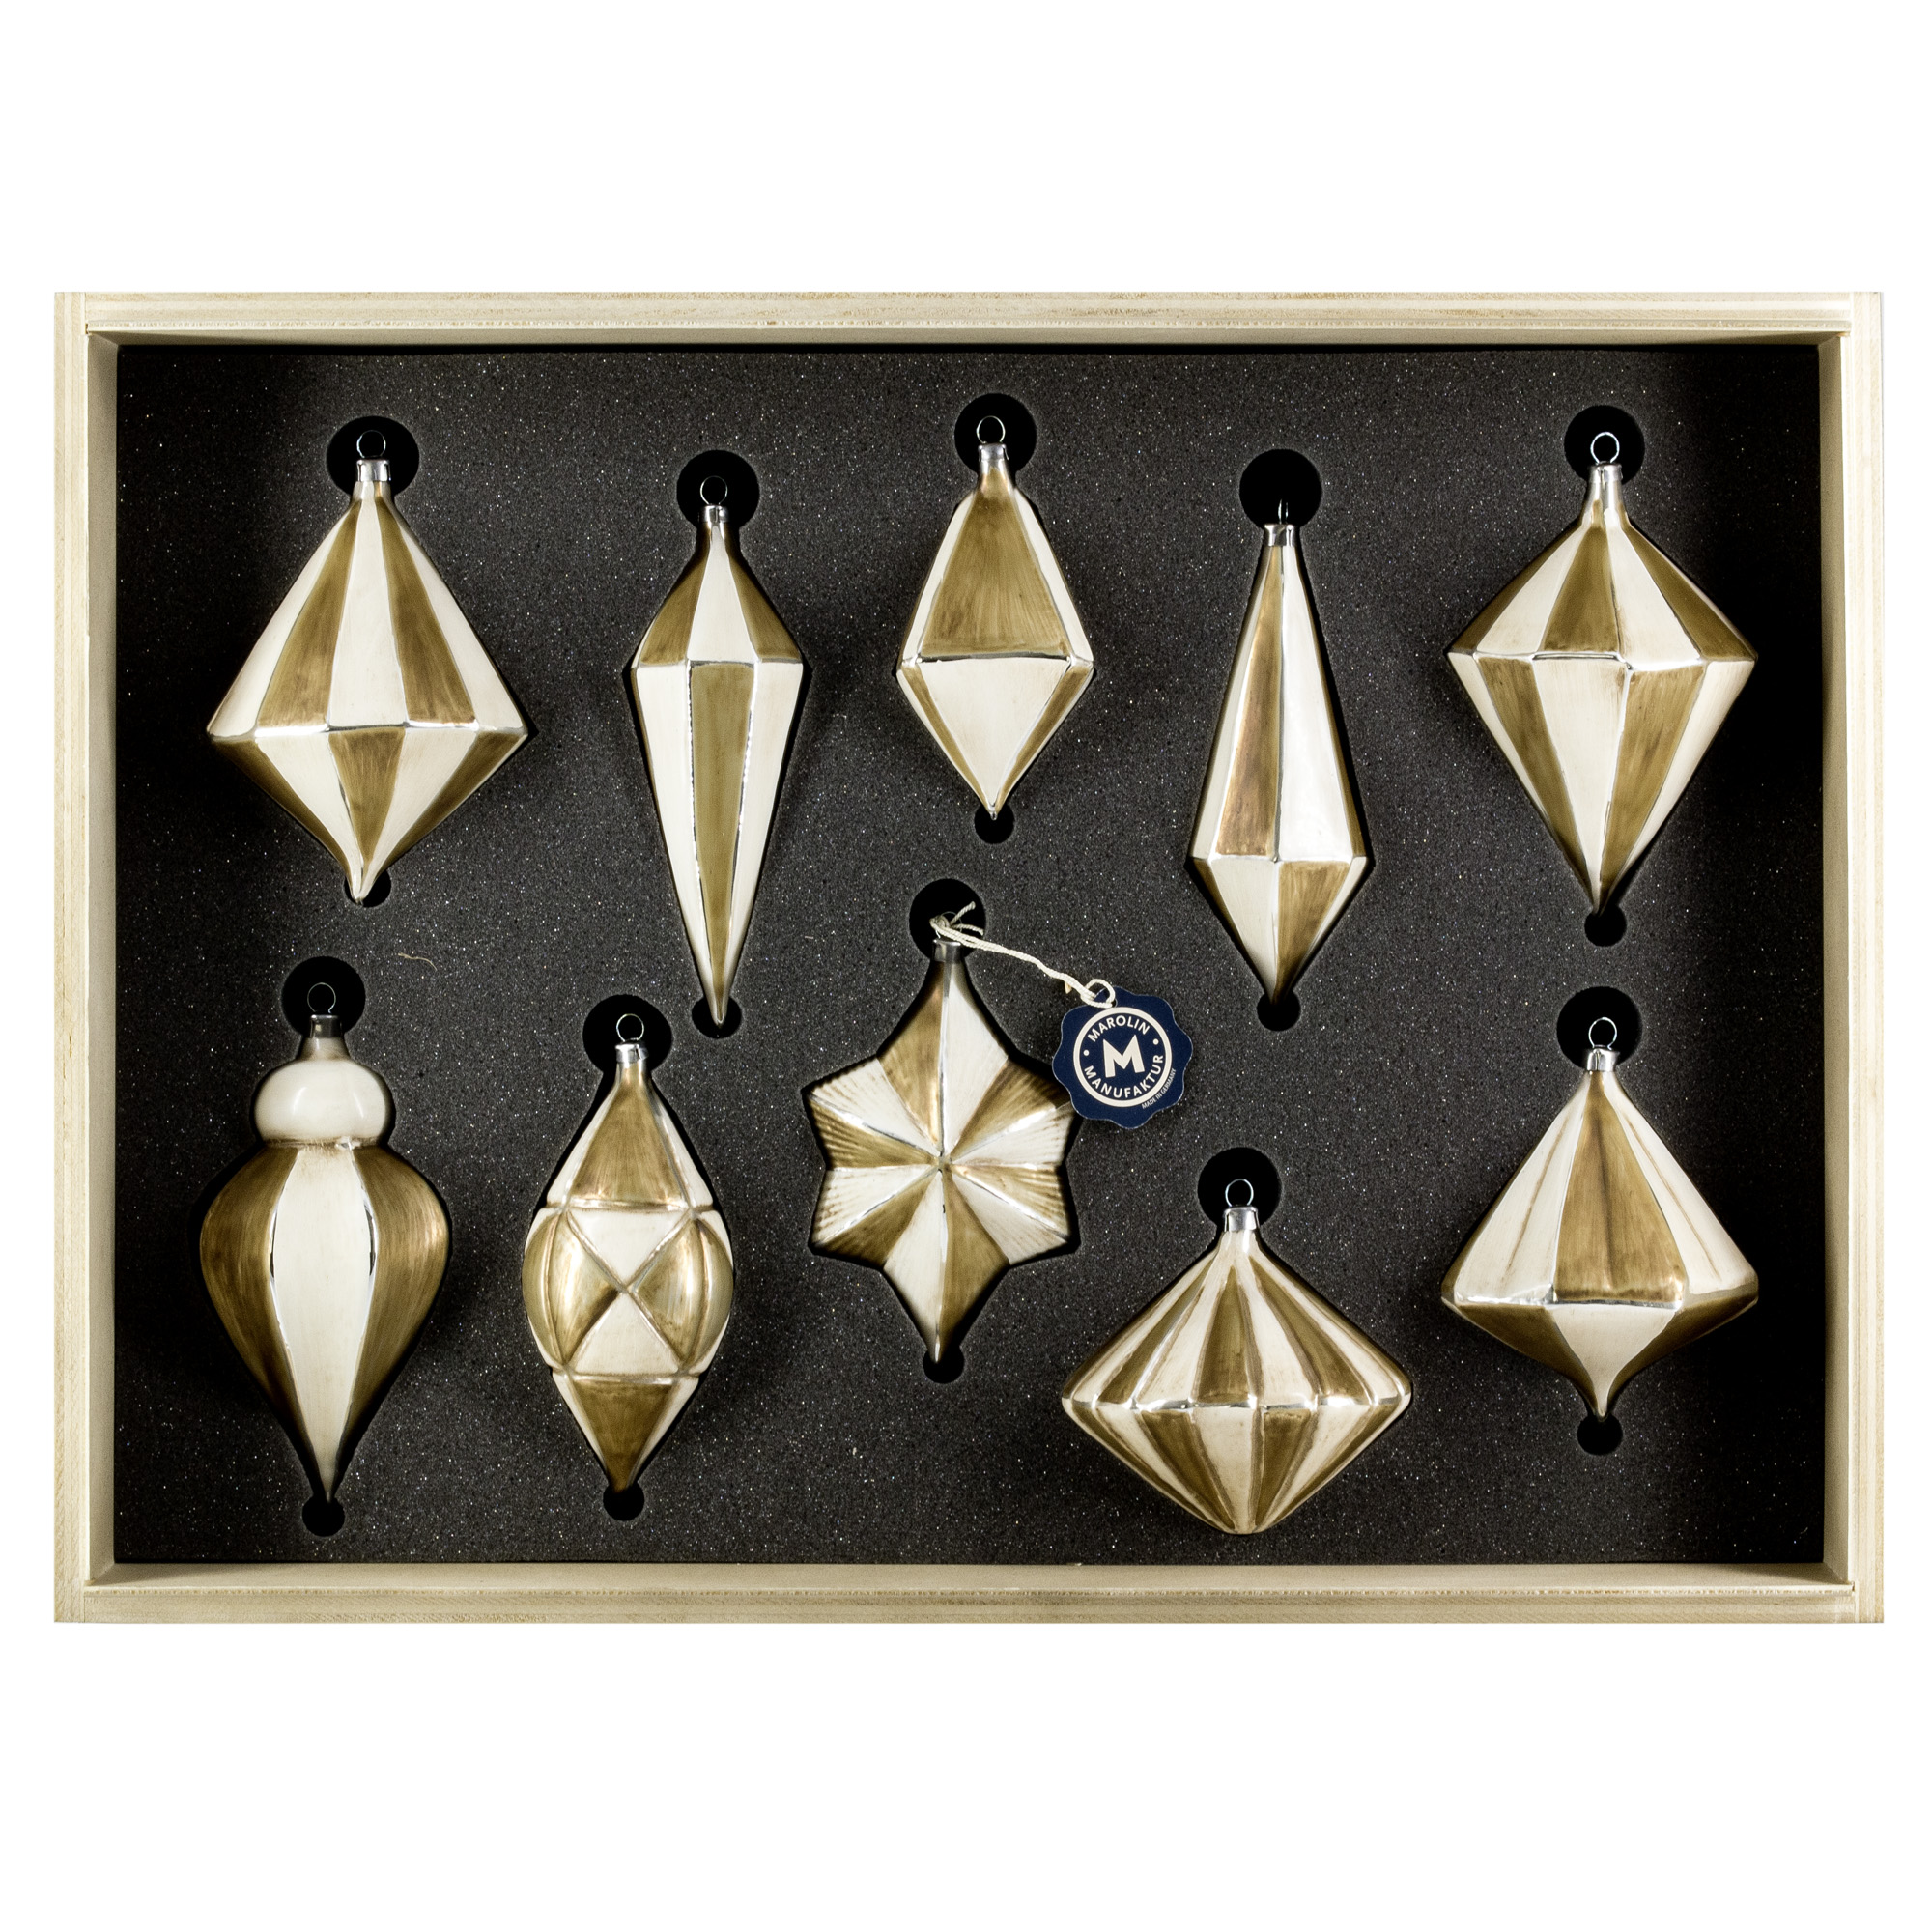 Art Déco Edition "Ivory - Gold" 10 pieces, packed in decorative wooden box